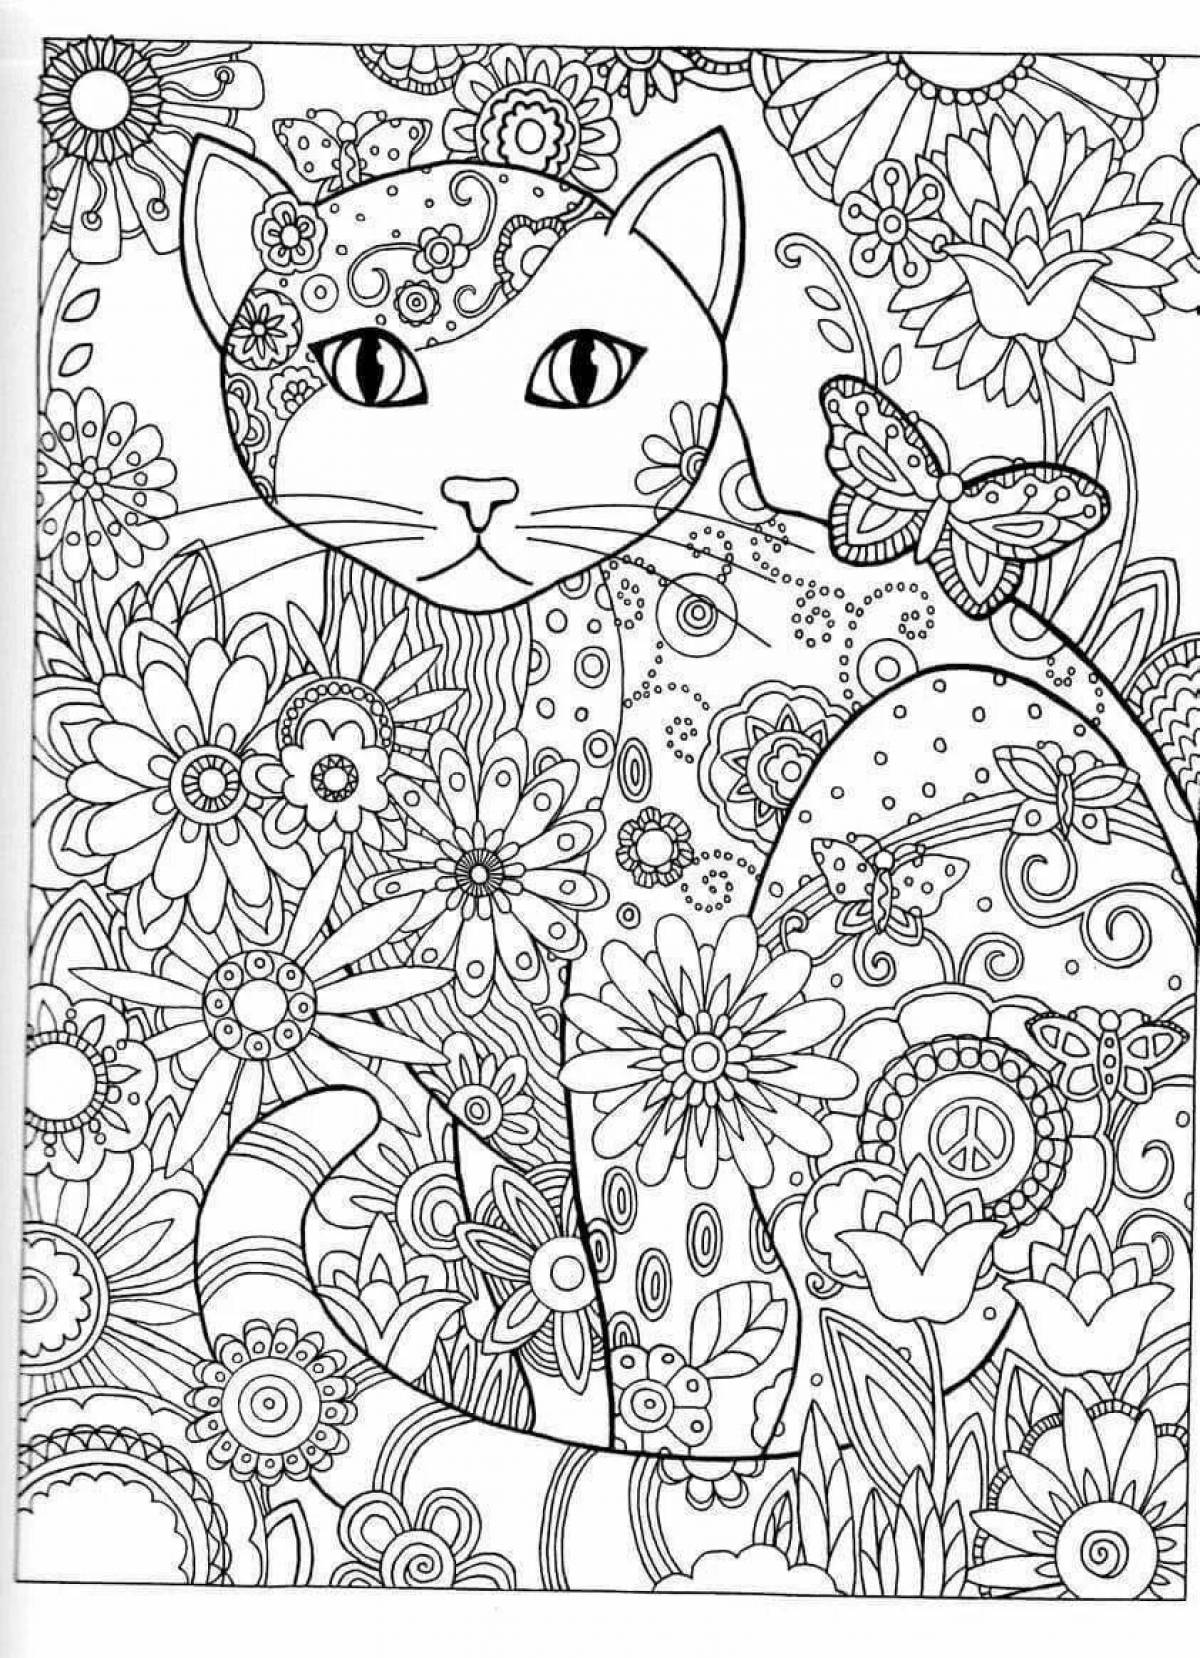 Color-frenzy coloring page for girls 9 years old